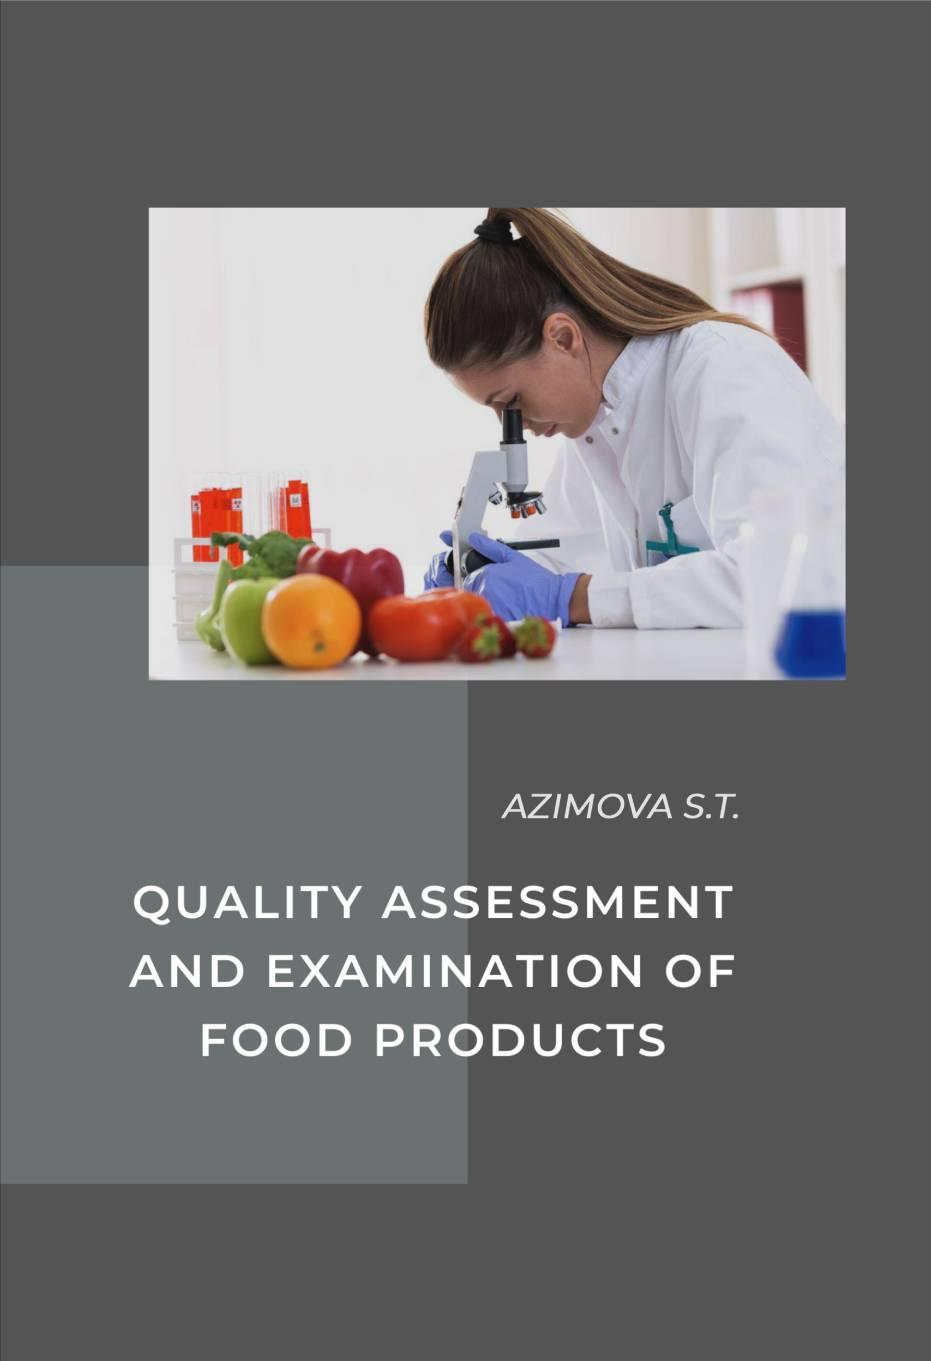 QUALITY ASSESSMENT AND EXAMINATION OF FOOD PRODUCTS. [teaching methodology]